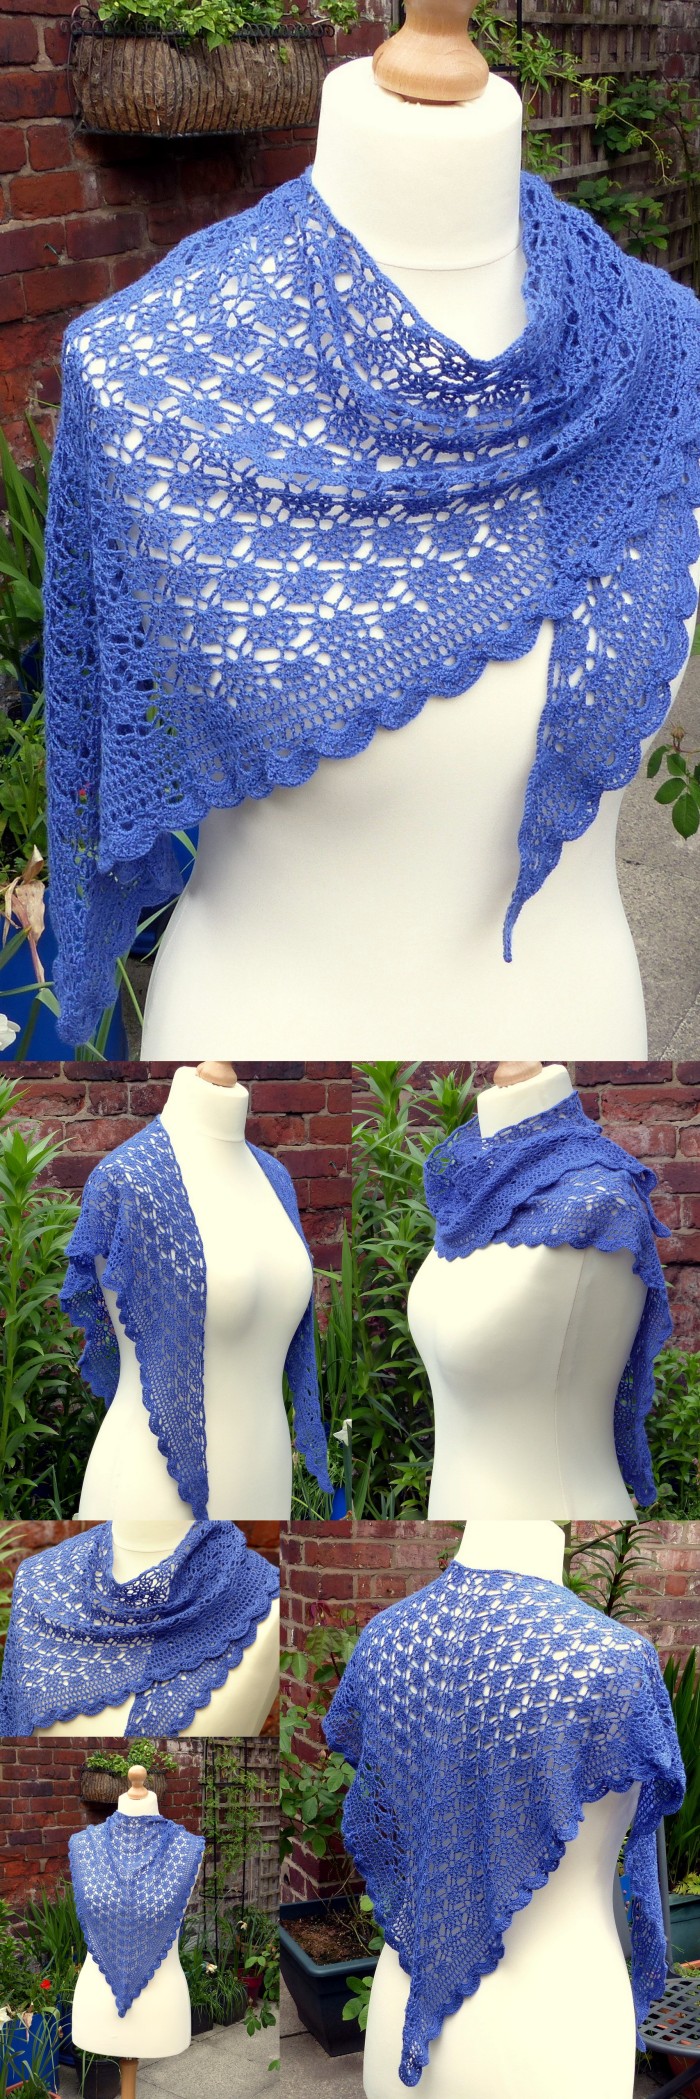 Mediterranean Lace Shawl - Free Crochet Pattern from Make My Day Creative